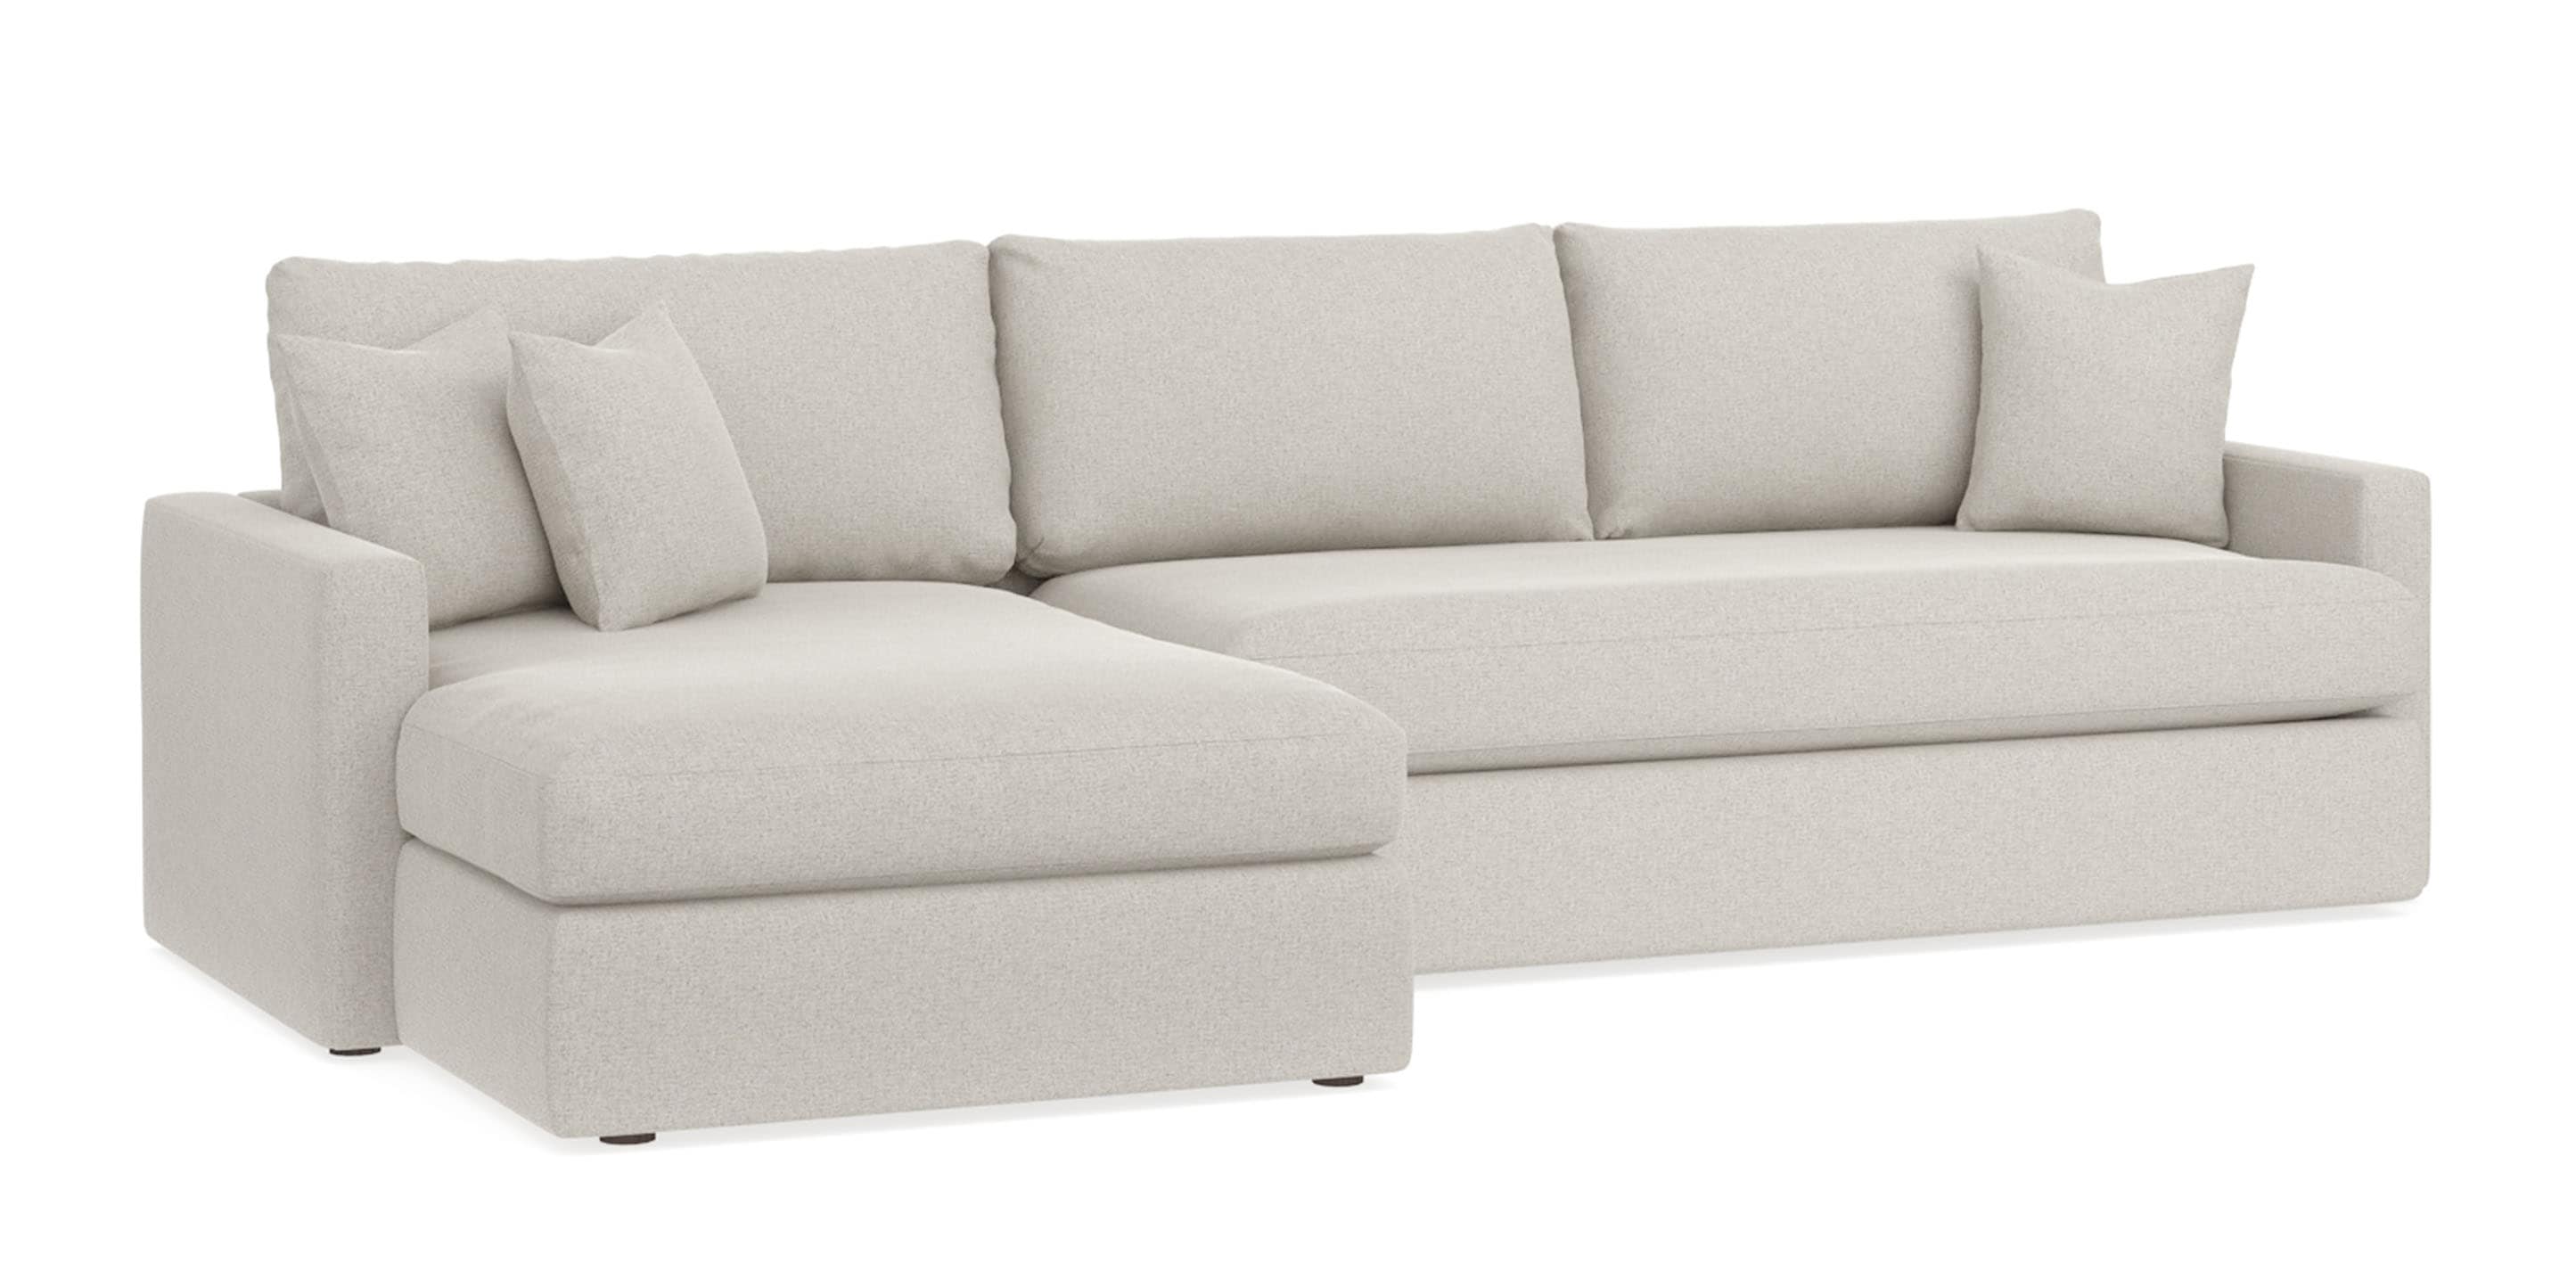 Allure Bench Seat Sectional